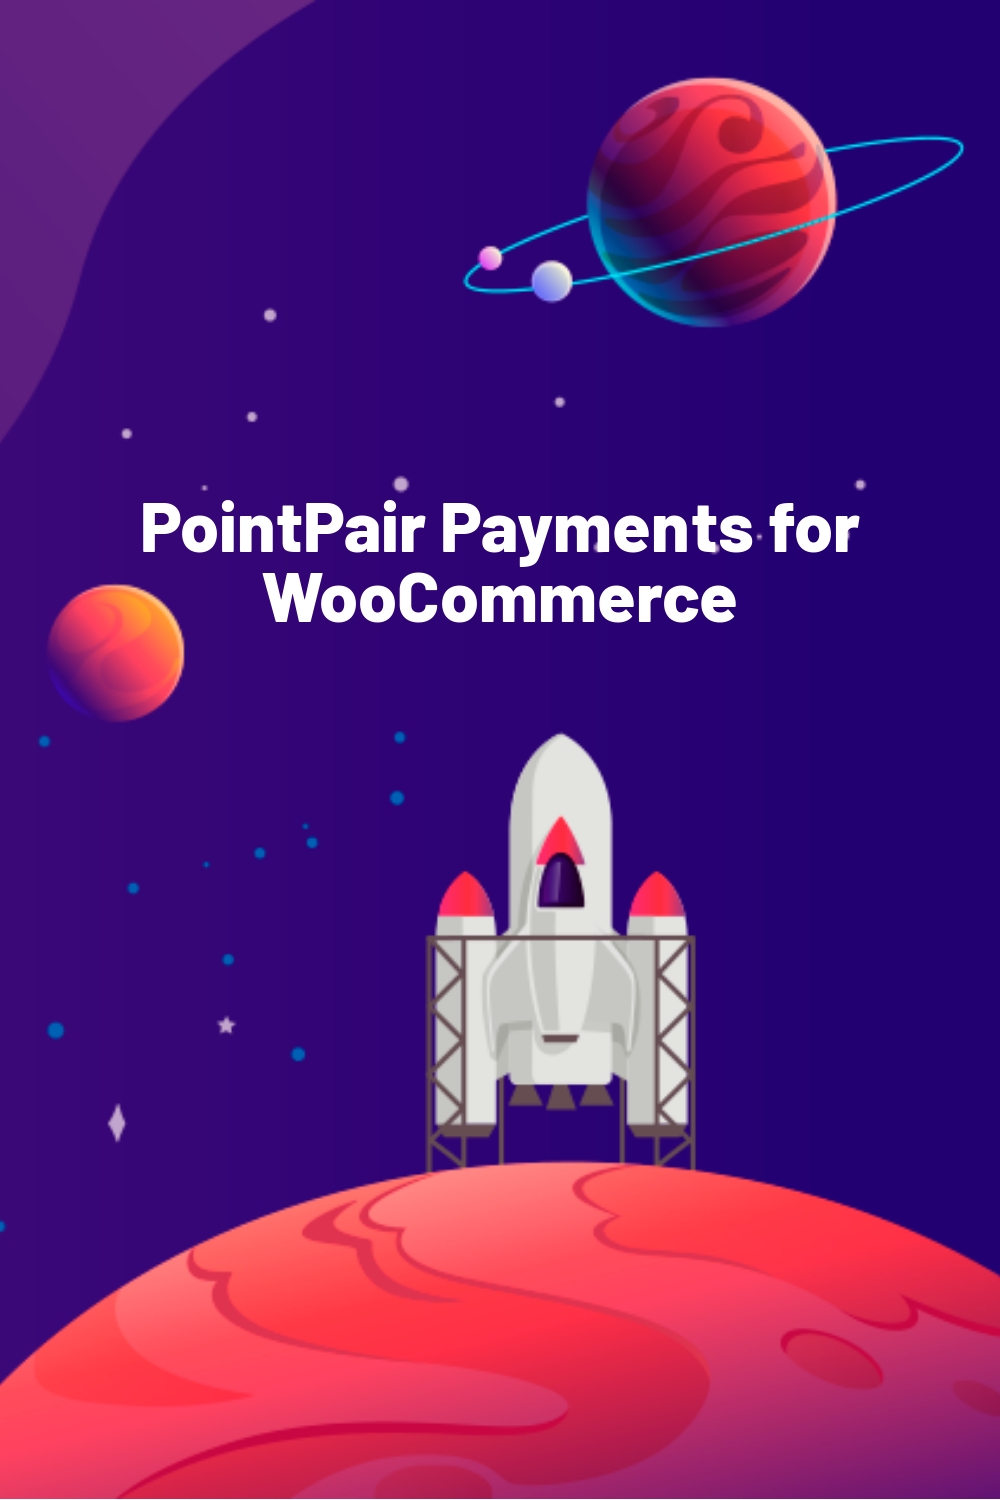 PointPair Payments for WooCommerce